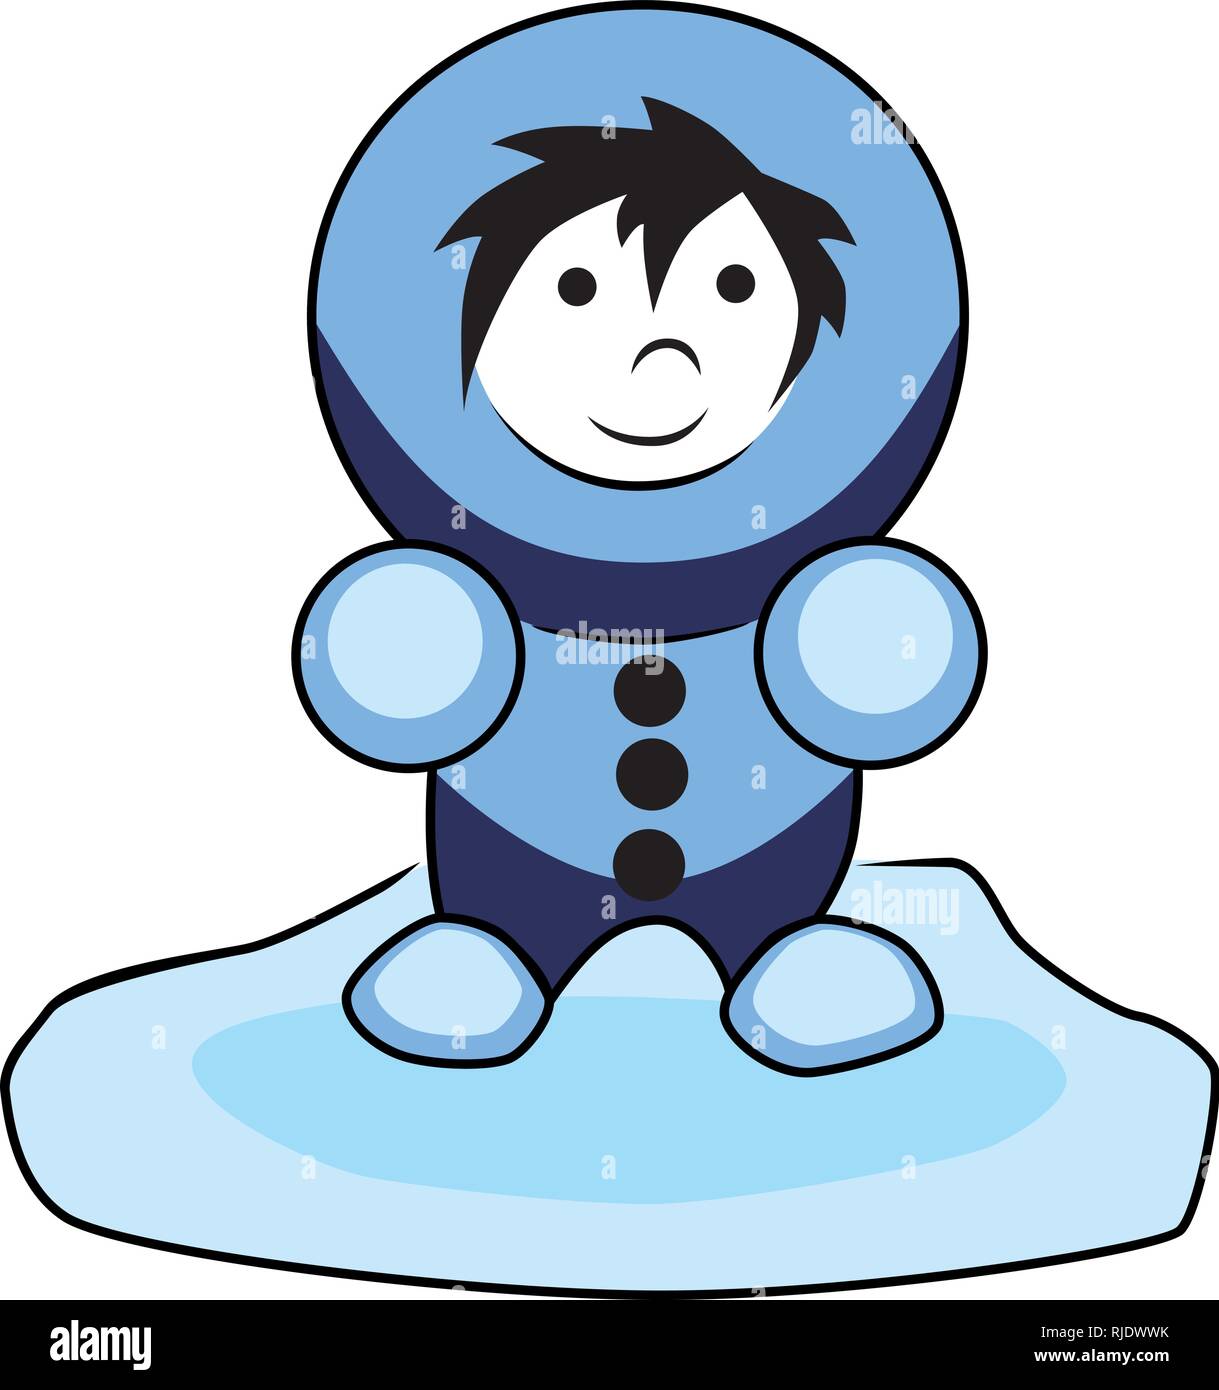 Eskimo child in a blue coat on an ice floe. The illustration is also available as vector graphic. Stock Vector